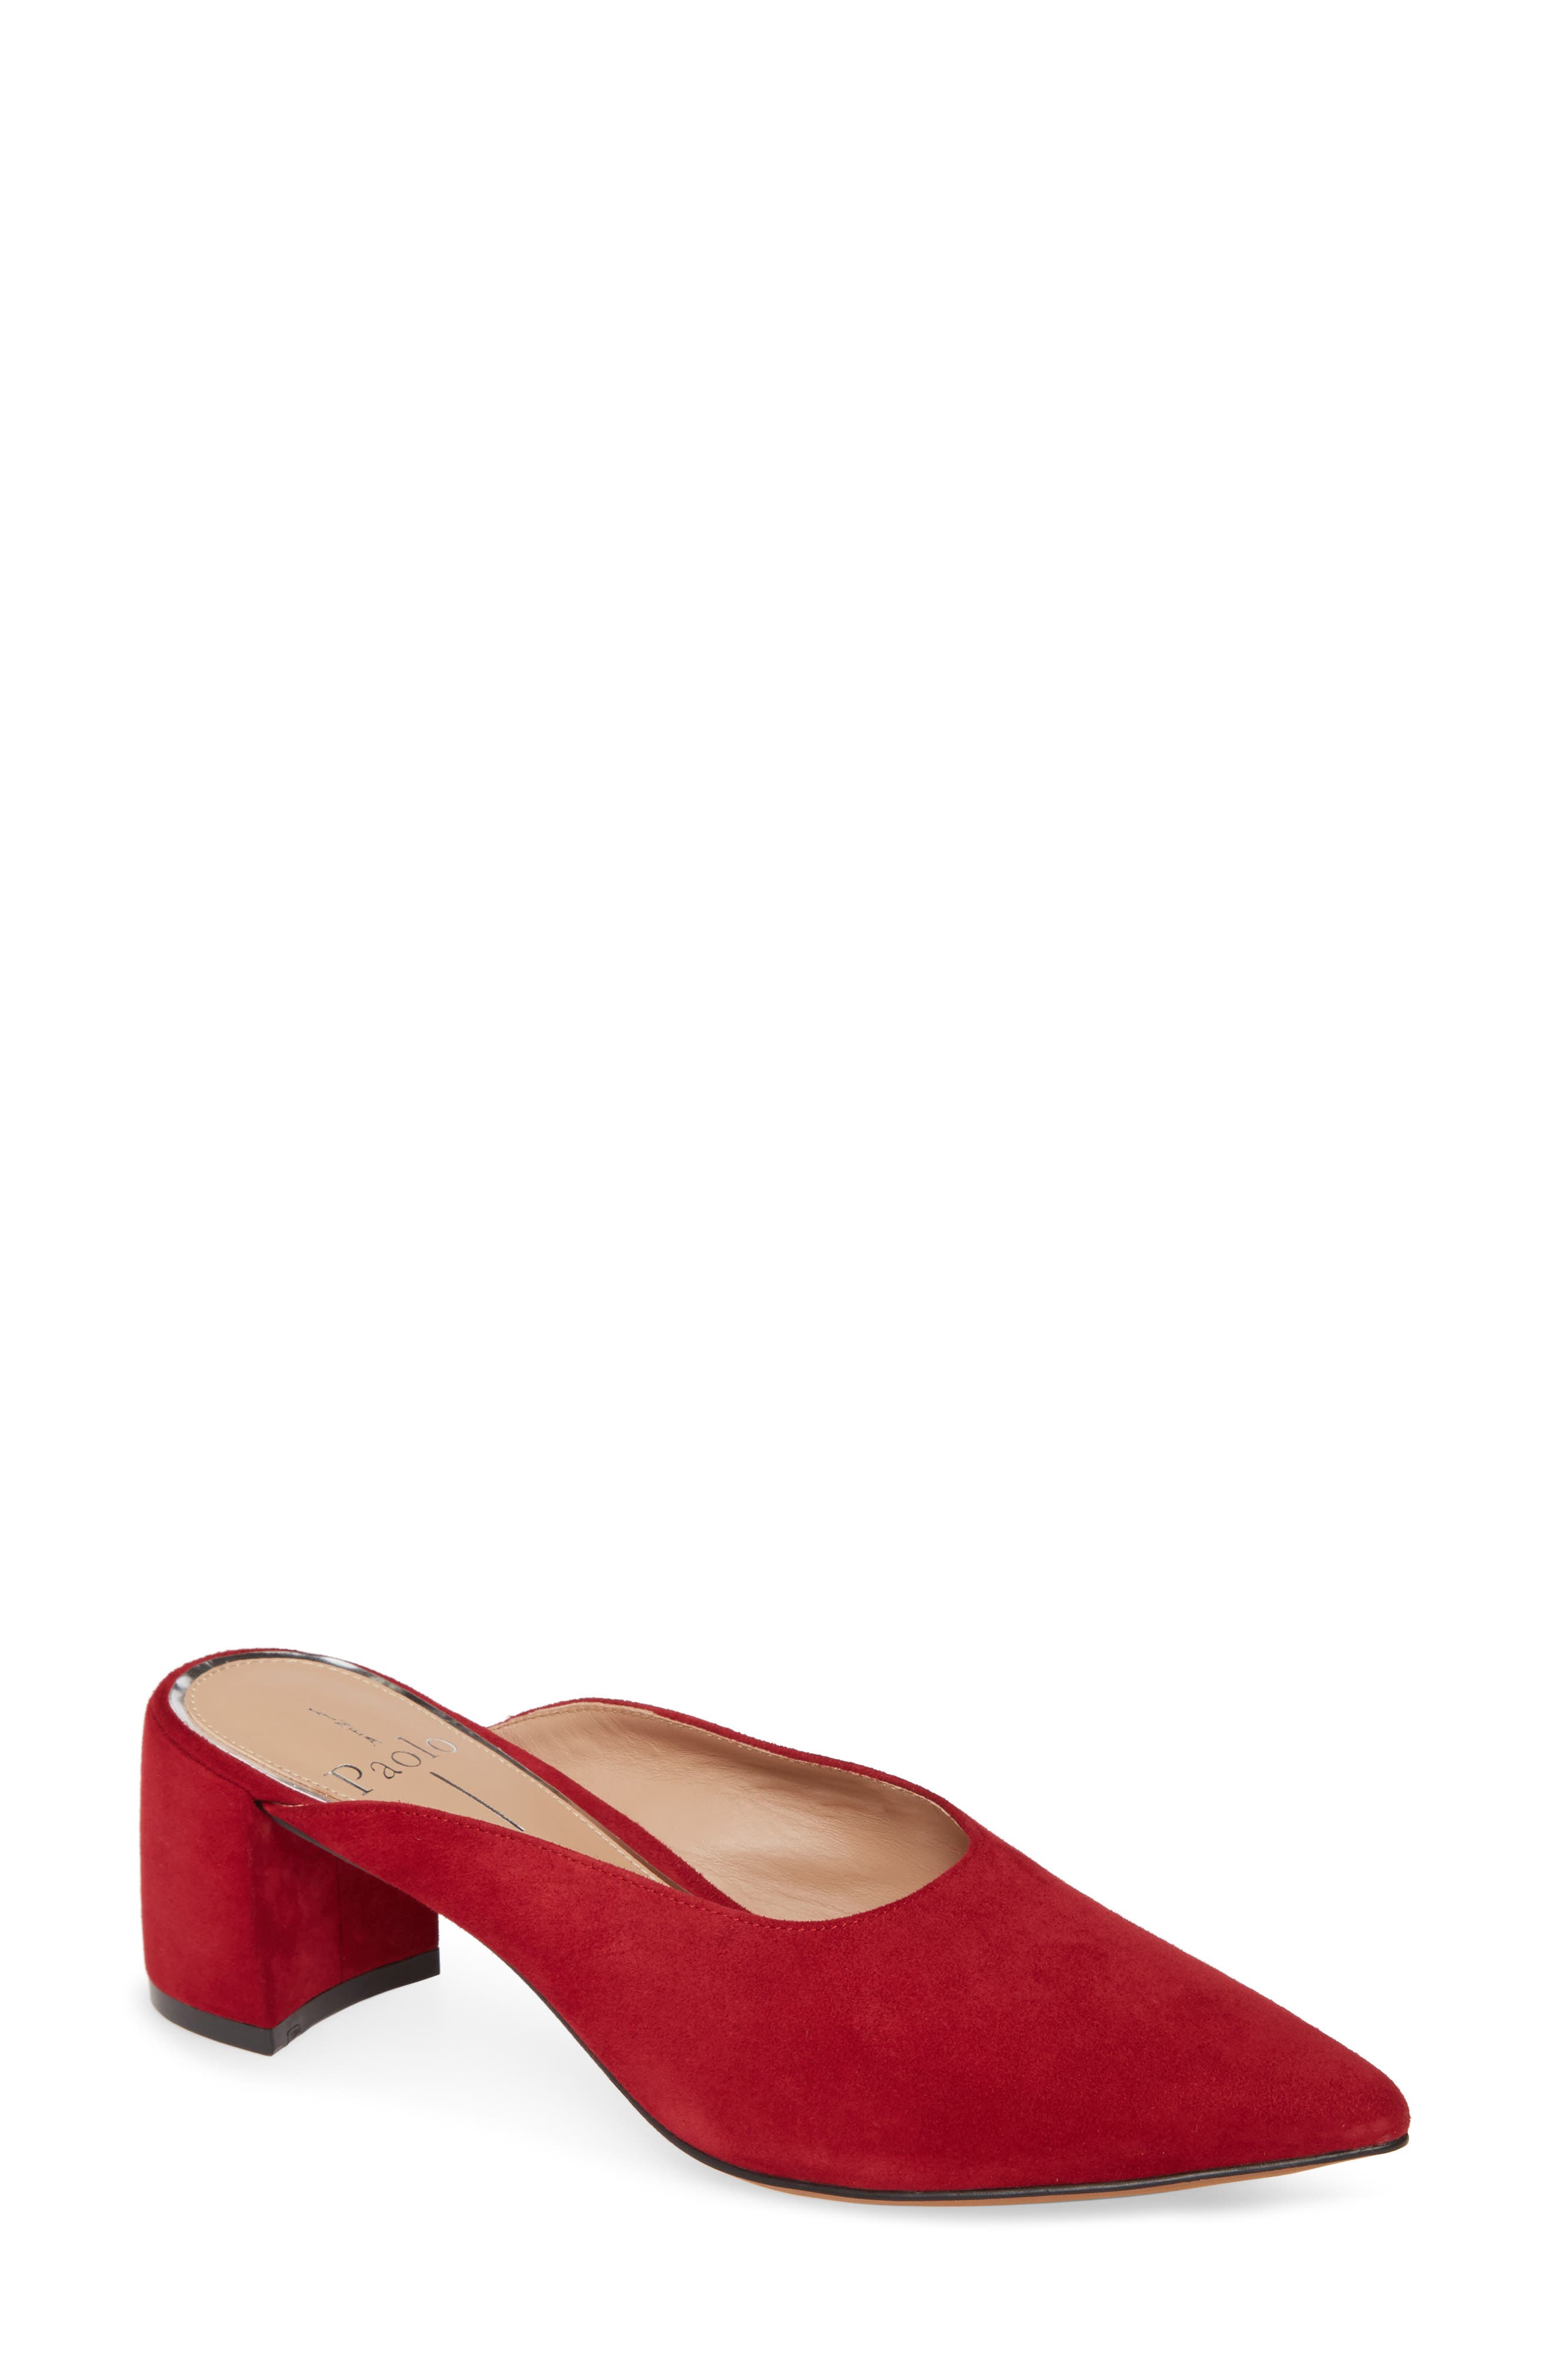 Nordstrom Women Shoes High Heels Wedges Wedge Sandals Block Heel Asymmetric Strap Sandal in Red Leather at Nordstrom 